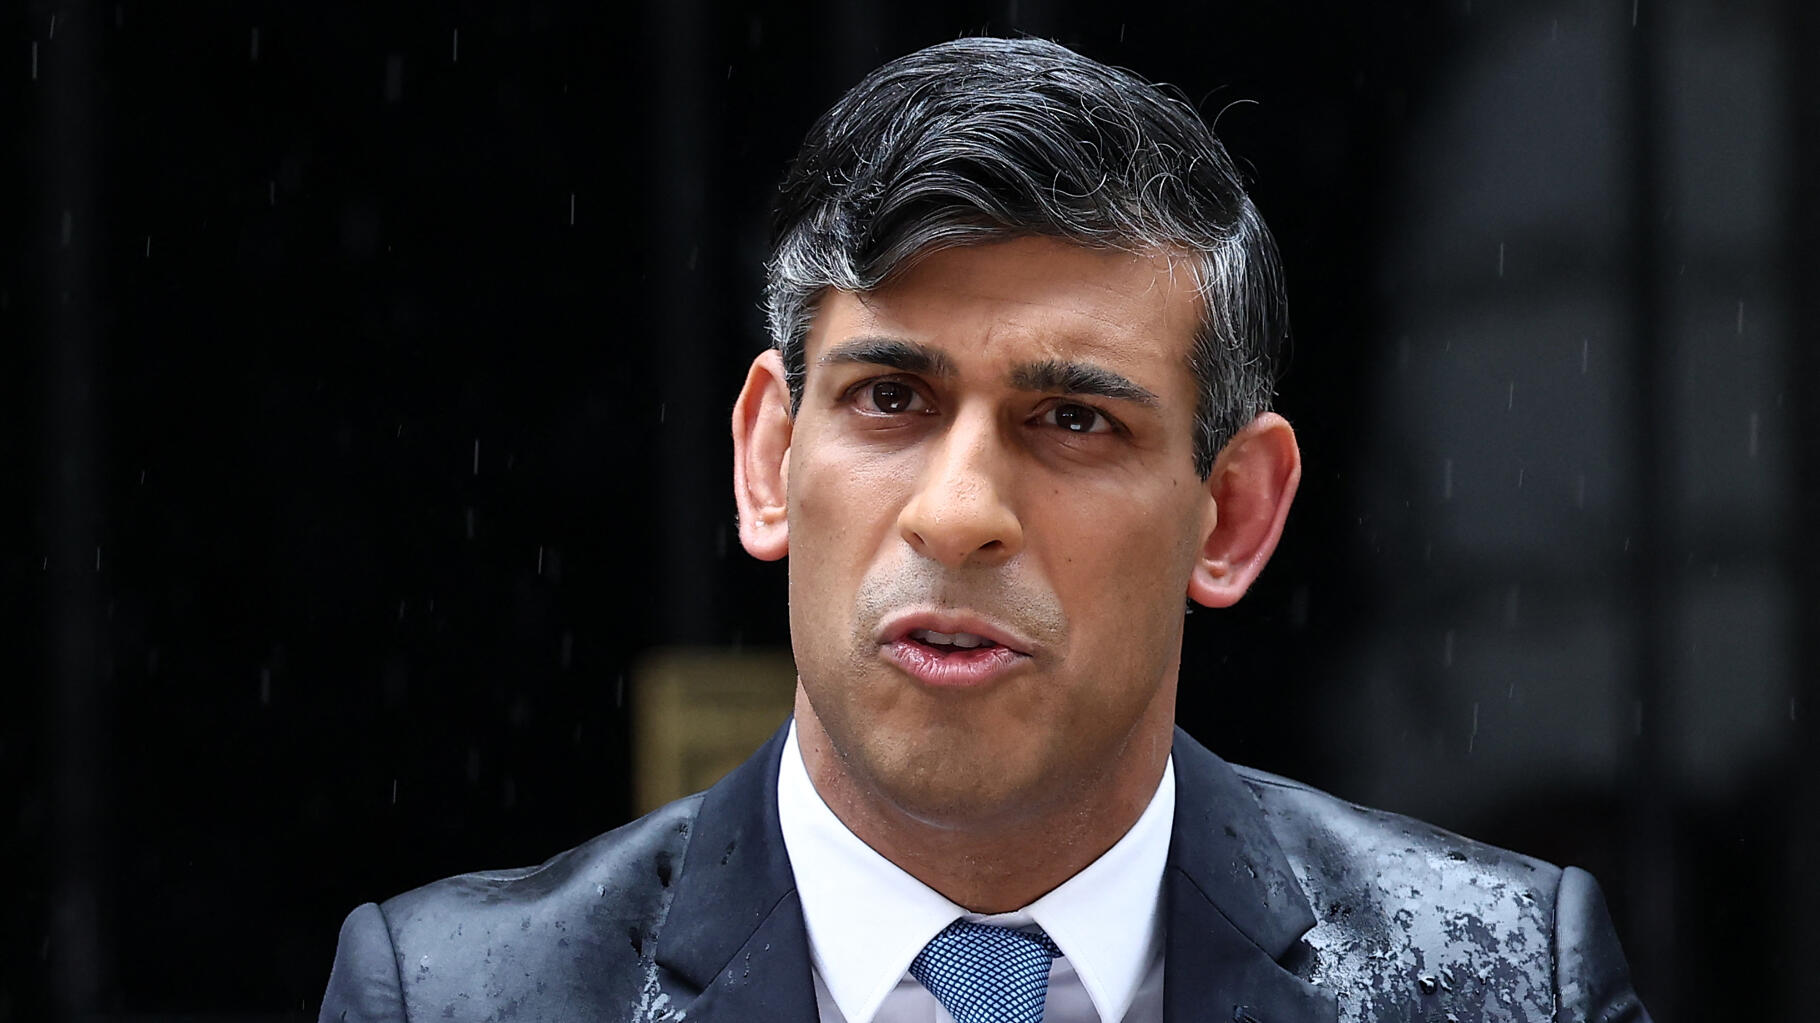 Rishi Sunak made an incredible troll during his announcement of the UK snap elections